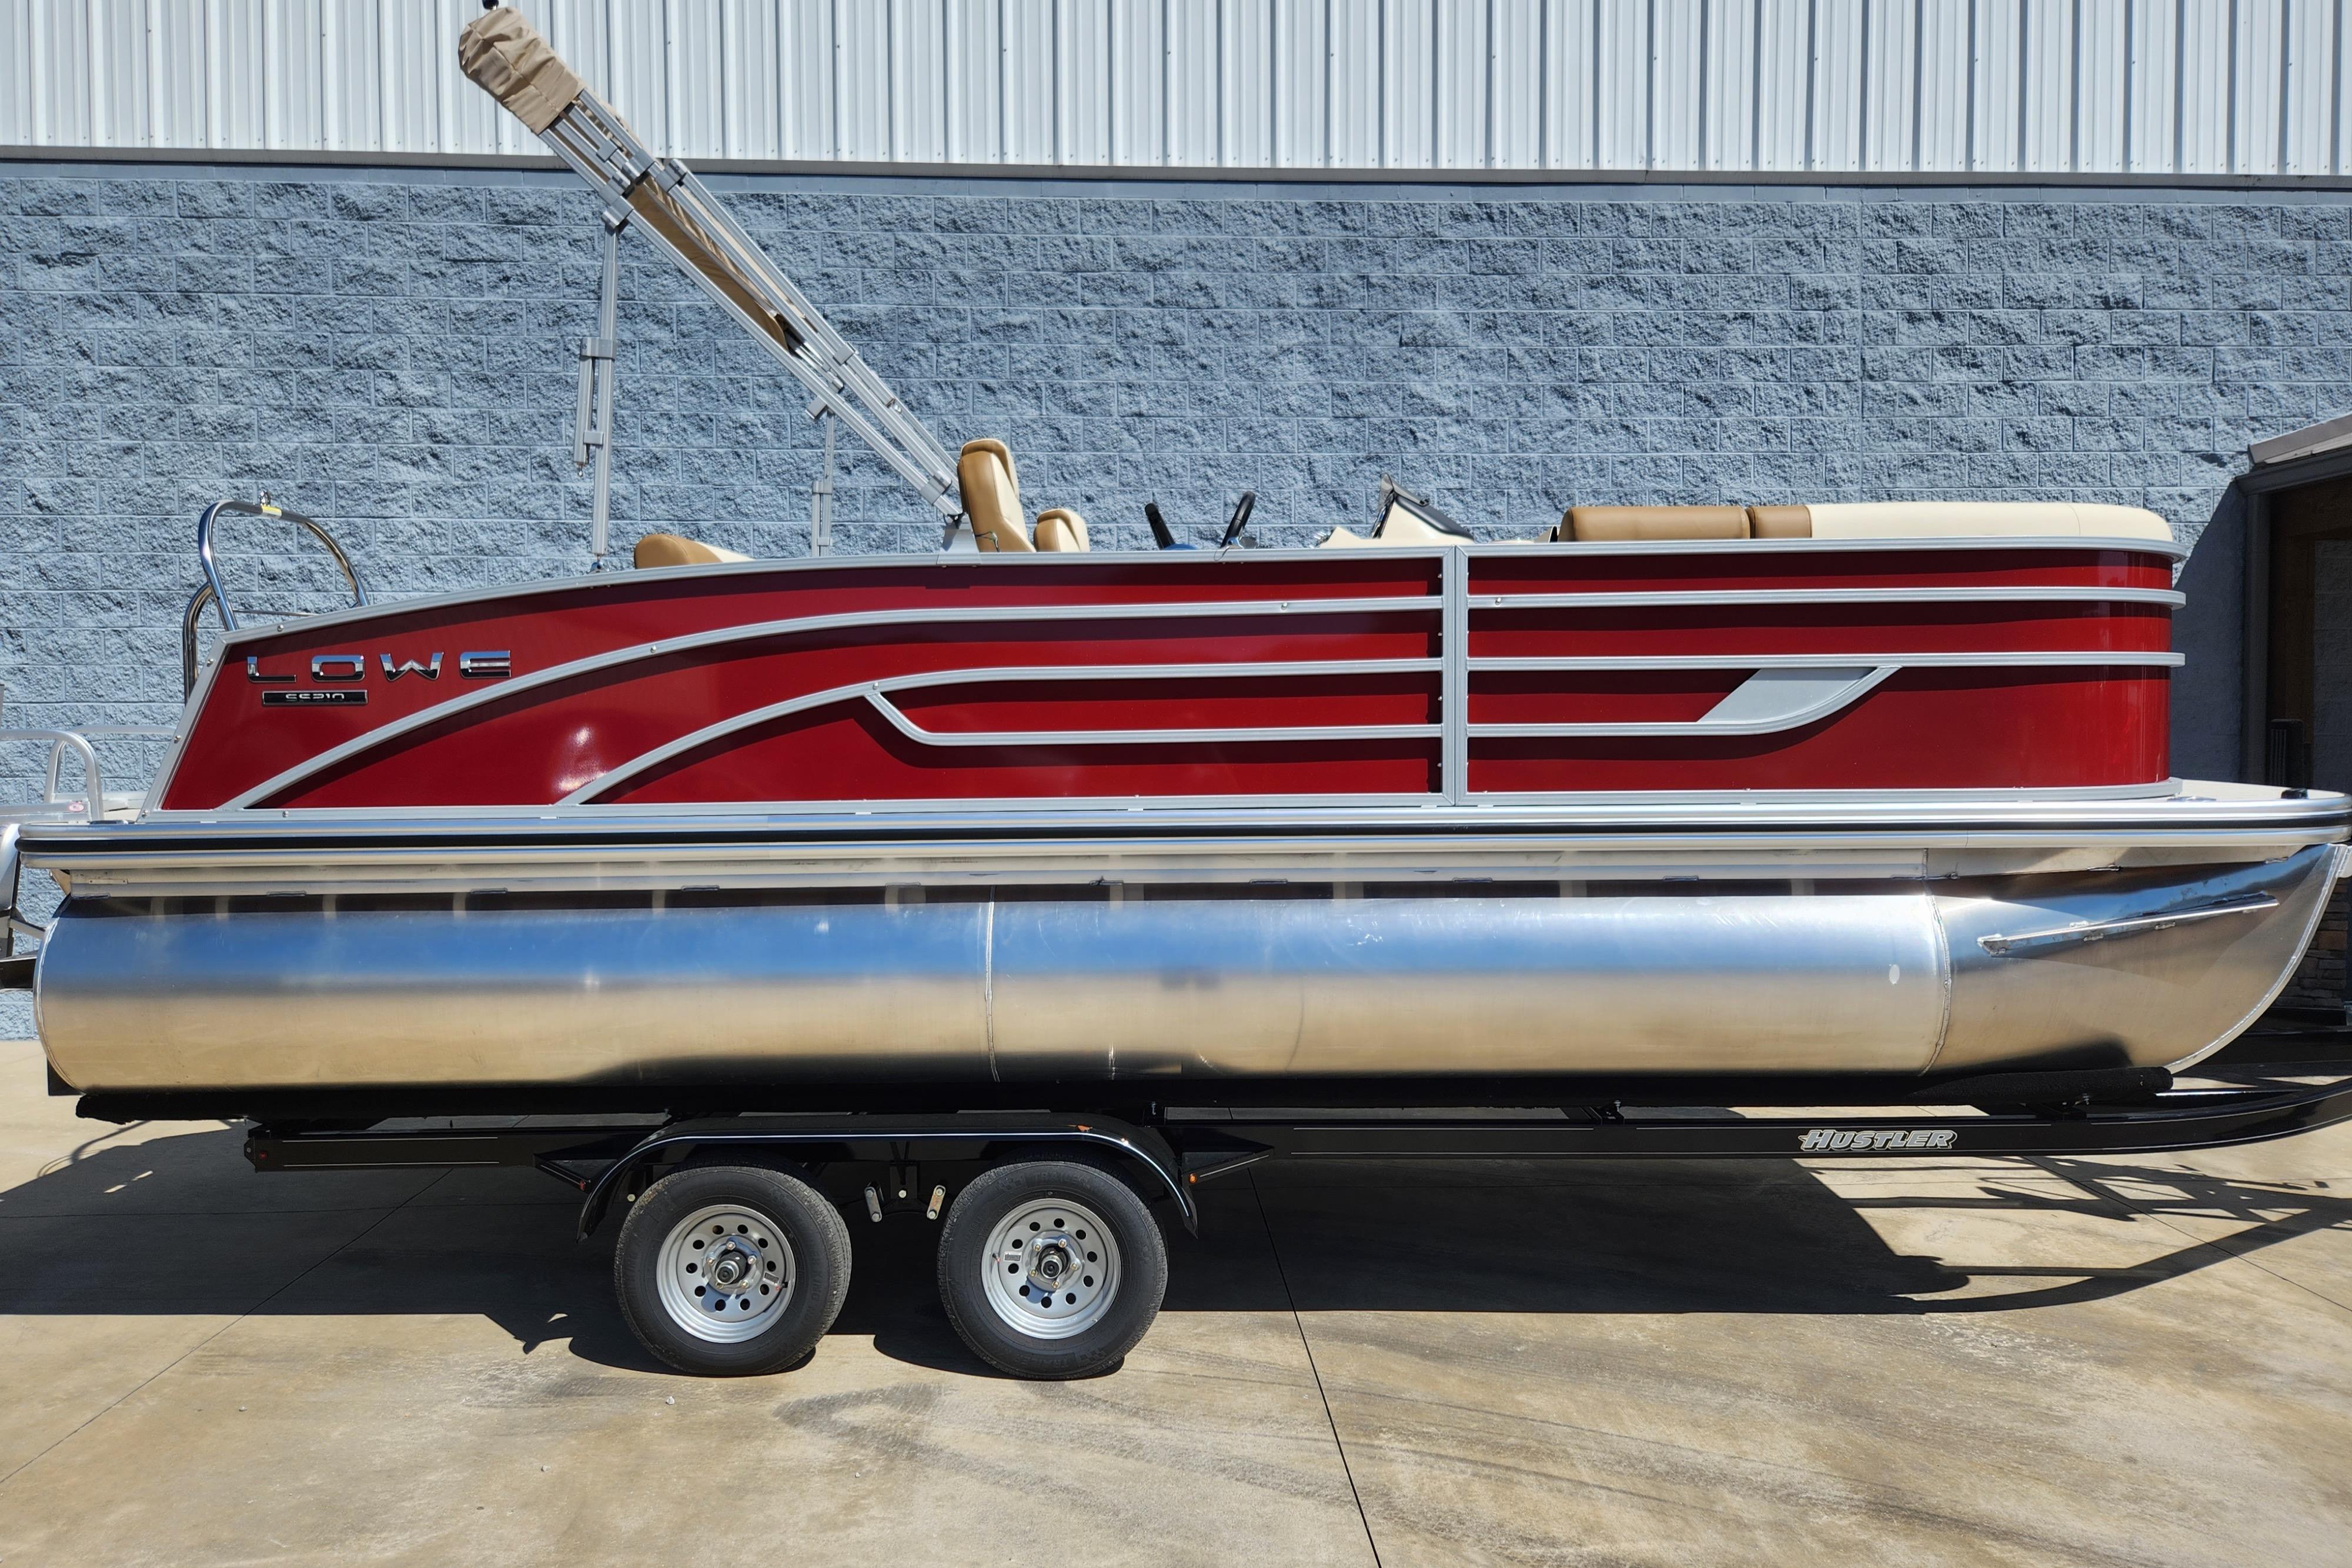 Lowe Ss210 Walk Thru boats for sale - Boat Trader